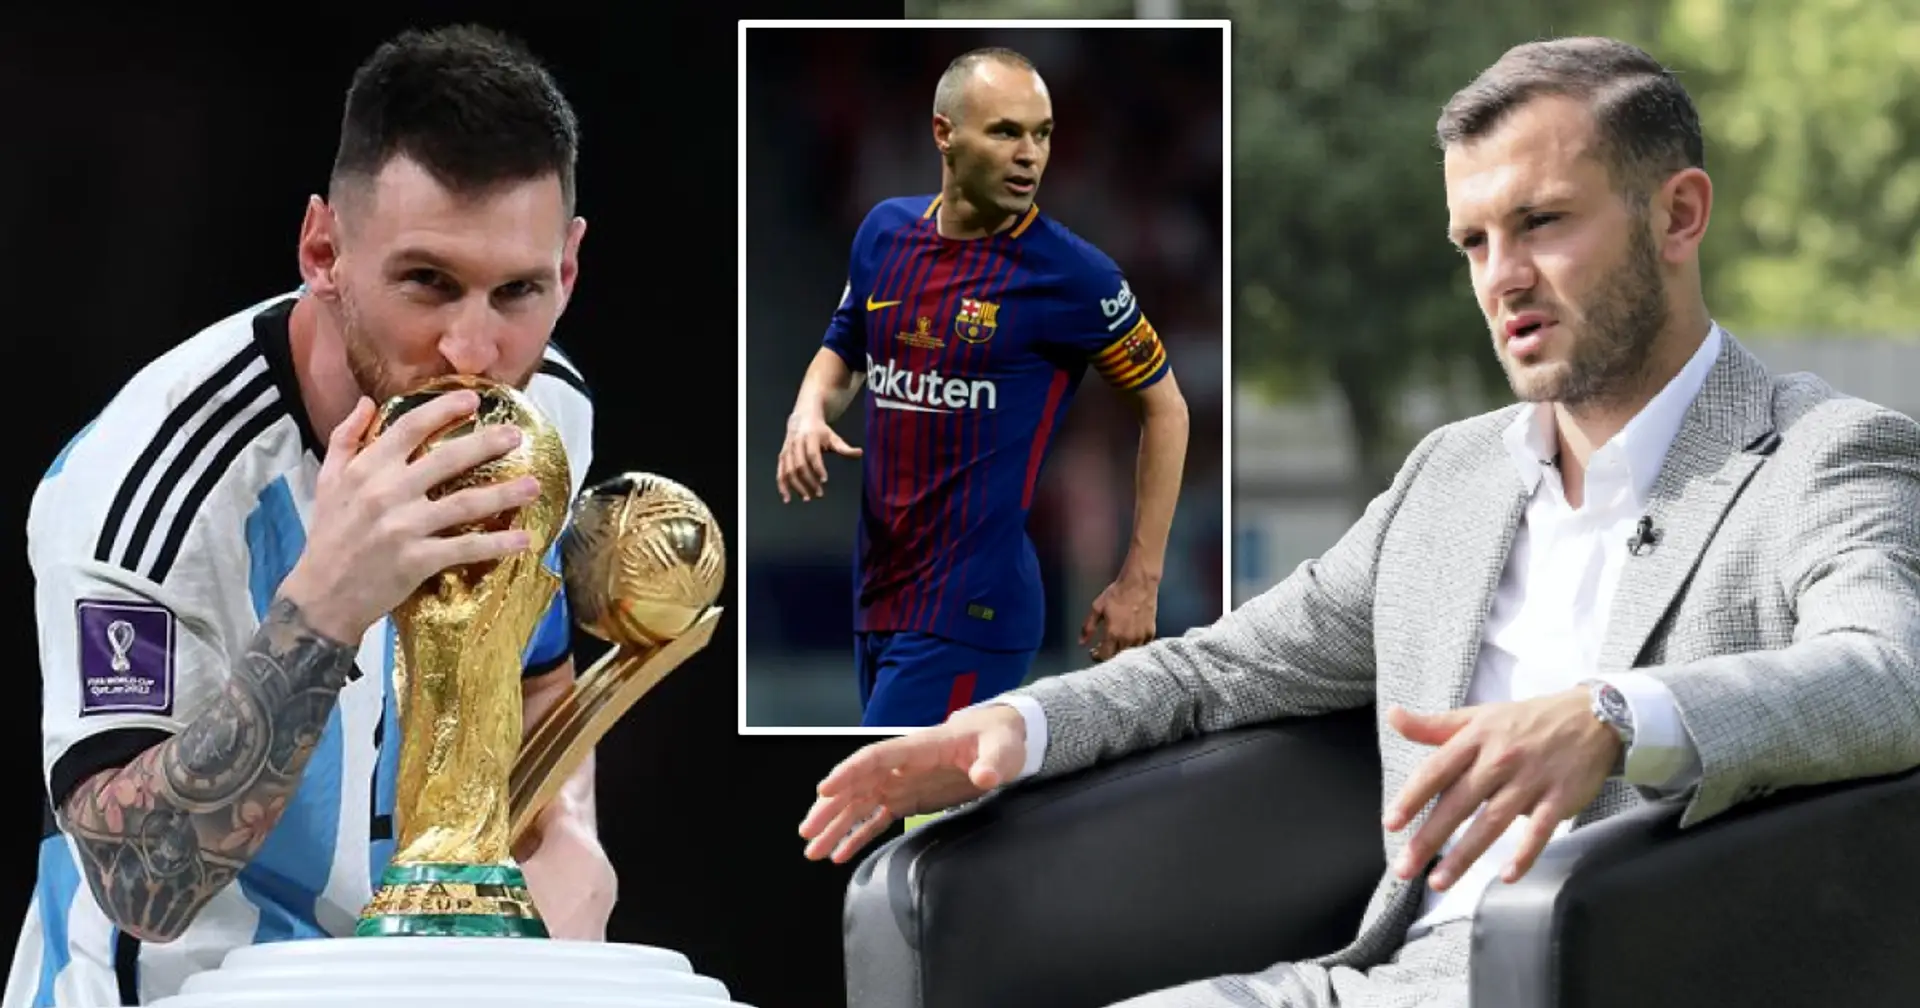 Jack Wilshere names his toughest opponent, snubs Lionel Messi and Andres Iniesta